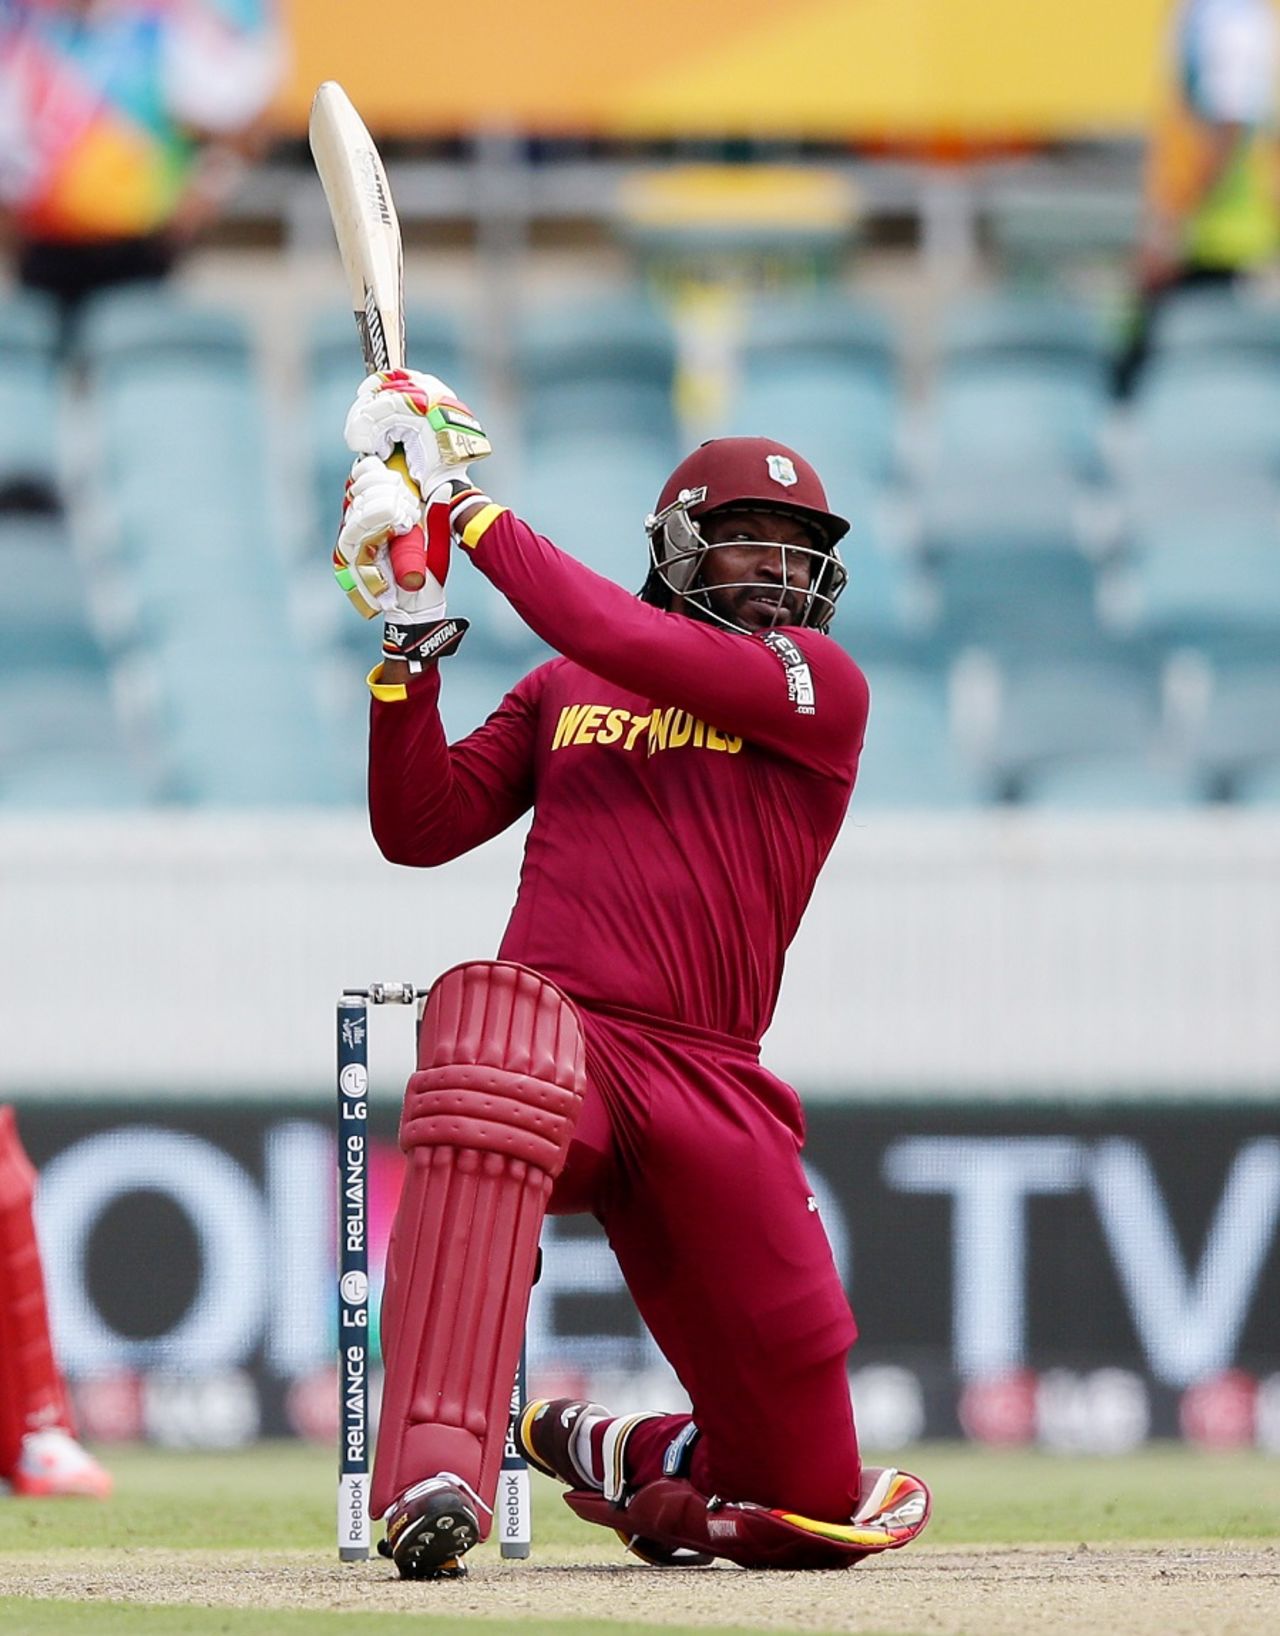 Chris Gayle tees off on his way to a double century, West Indies v Zimbabwe, World Cup 2015, Group B, Canberra, February 24, 2015